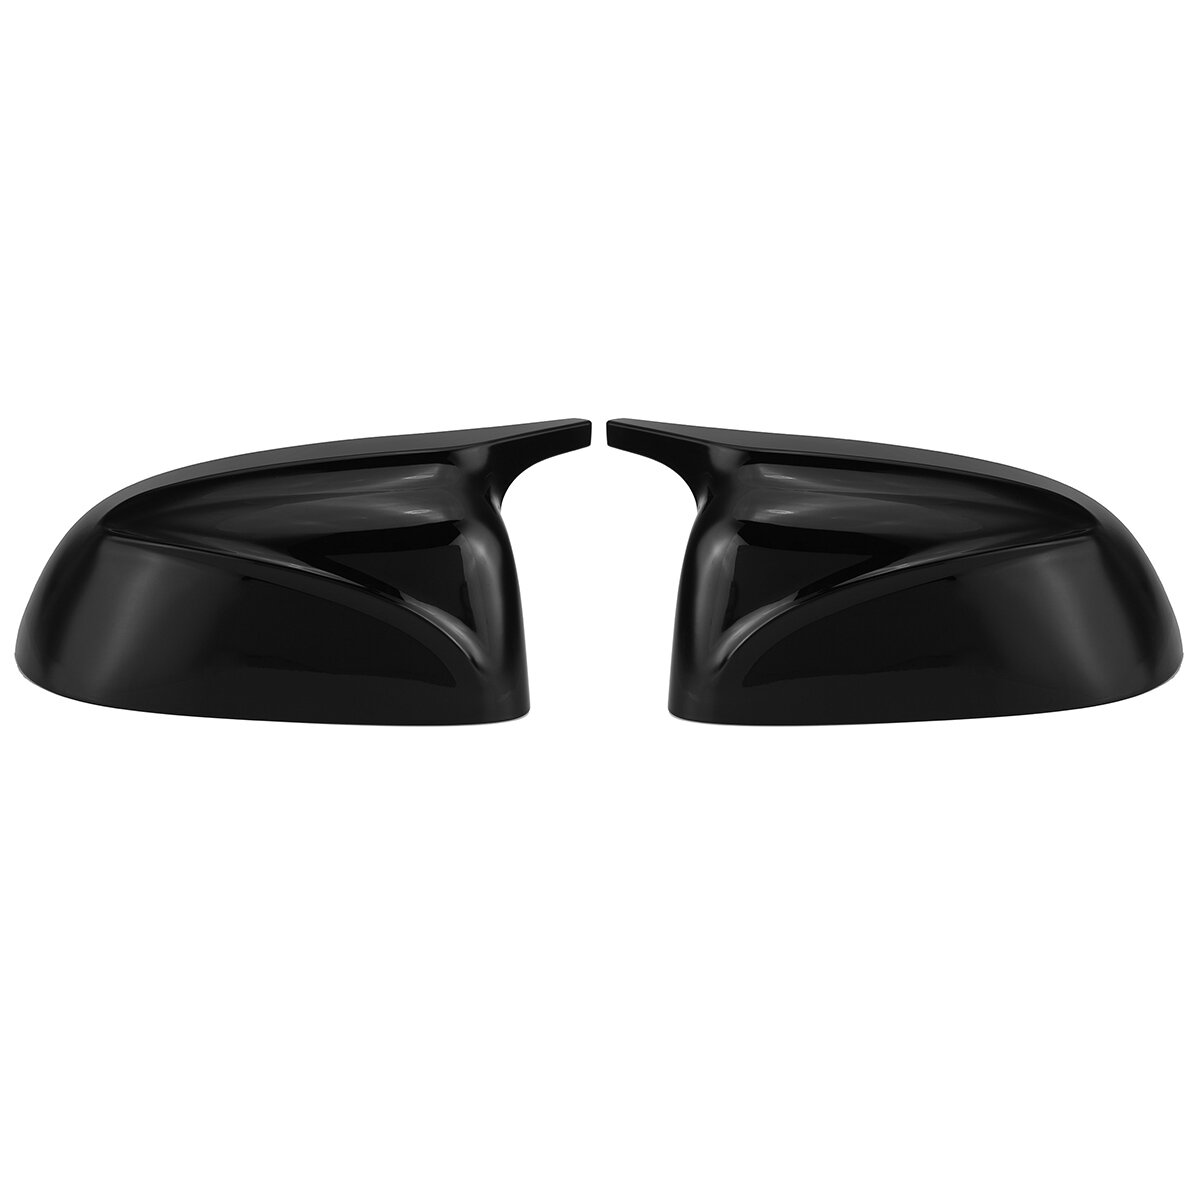 

M Style Glossy Black Replacement Side Mirror Cover Caps For BMW X3 X4 X5 X6 X7 G01 G02 G05 G06 G07 2018-2020